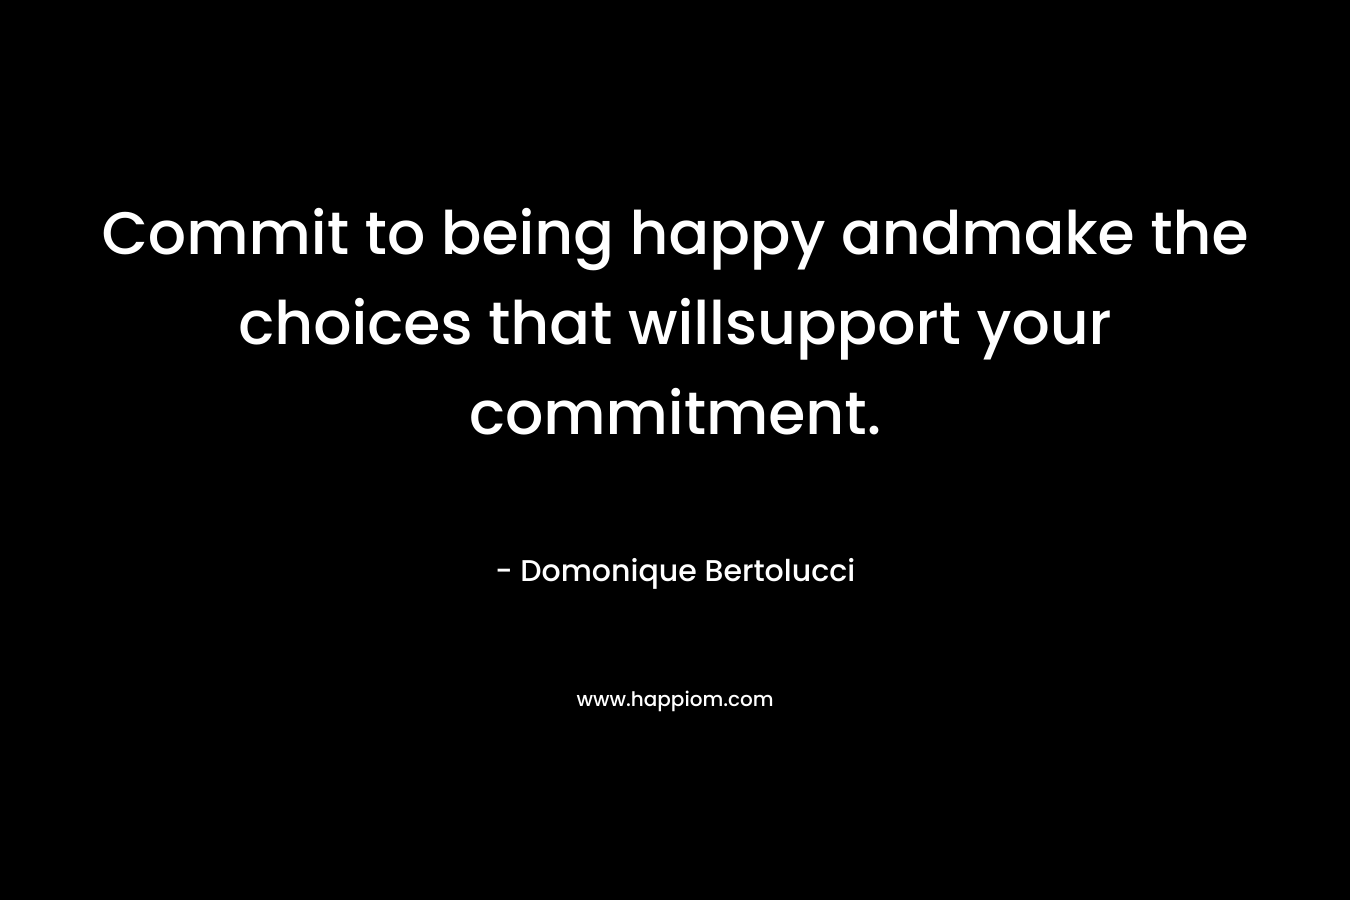 Commit to being happy andmake the choices that willsupport your commitment. – Domonique Bertolucci